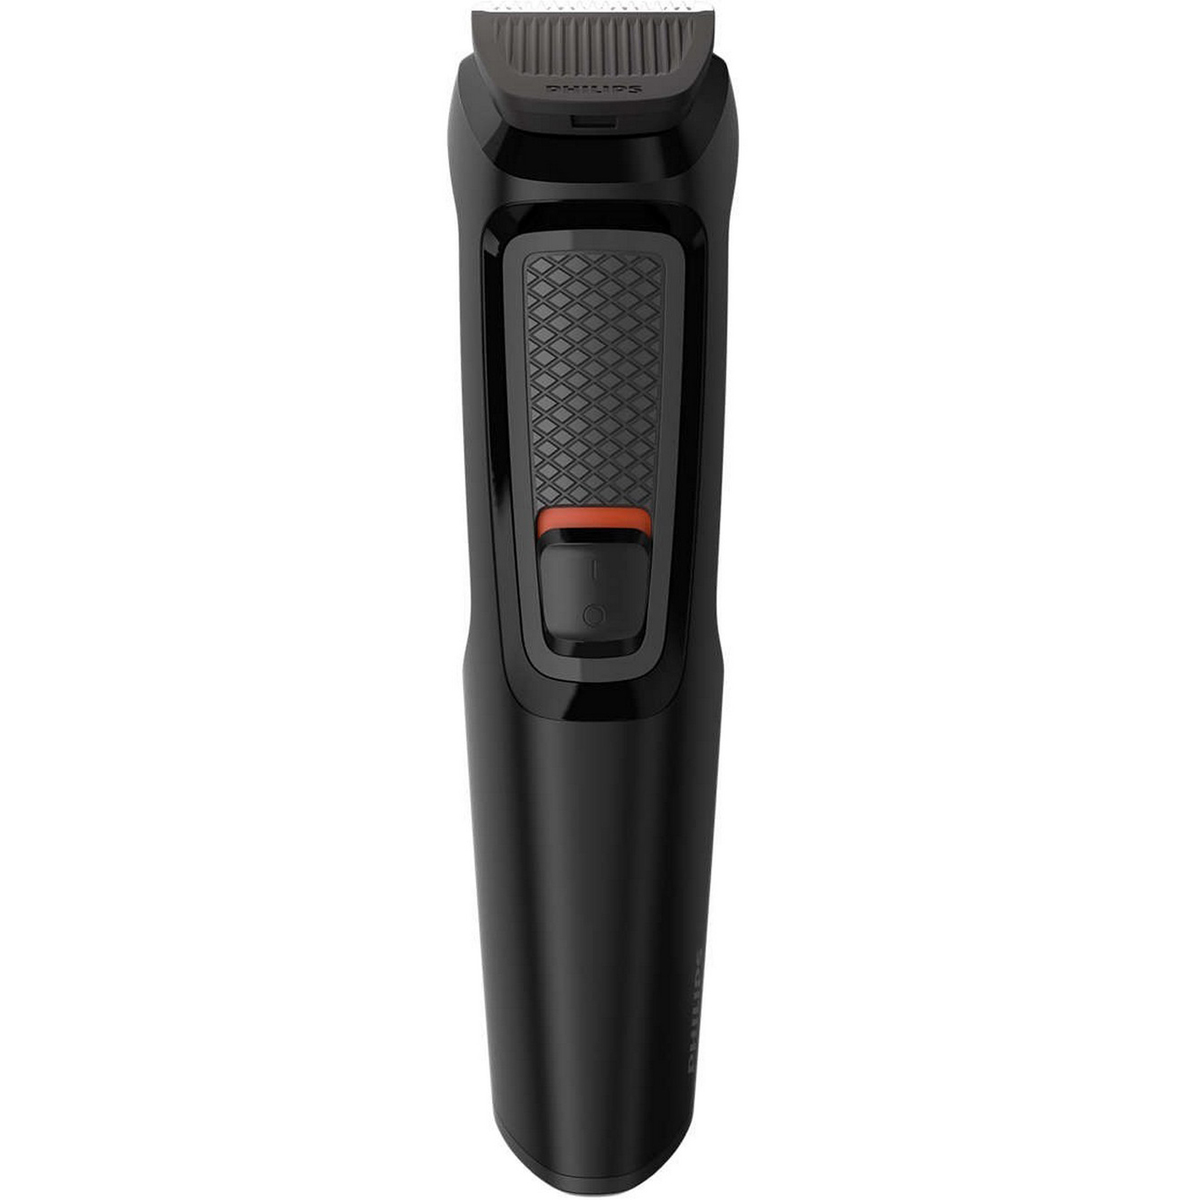 Philips Multi Trimmer MG3710/13     